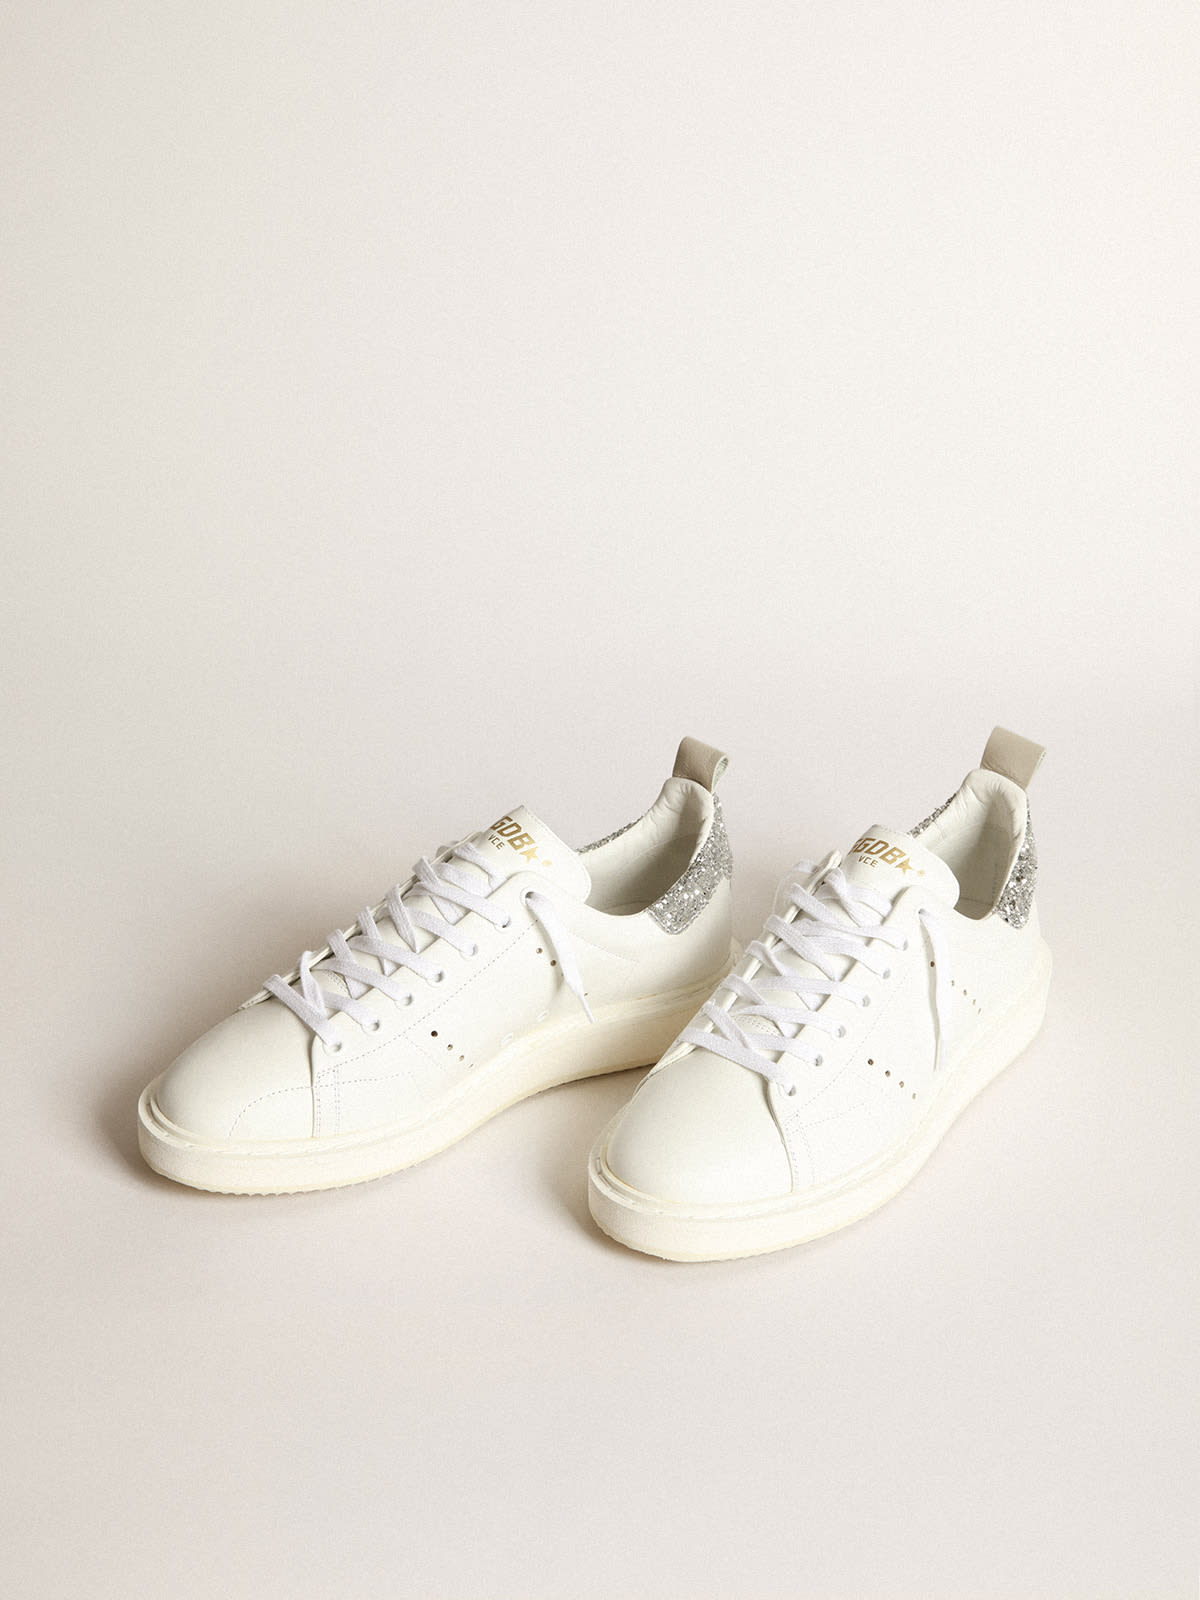 Golden Goose - Starter sneakers in white leather with silver glitter heel tab in 